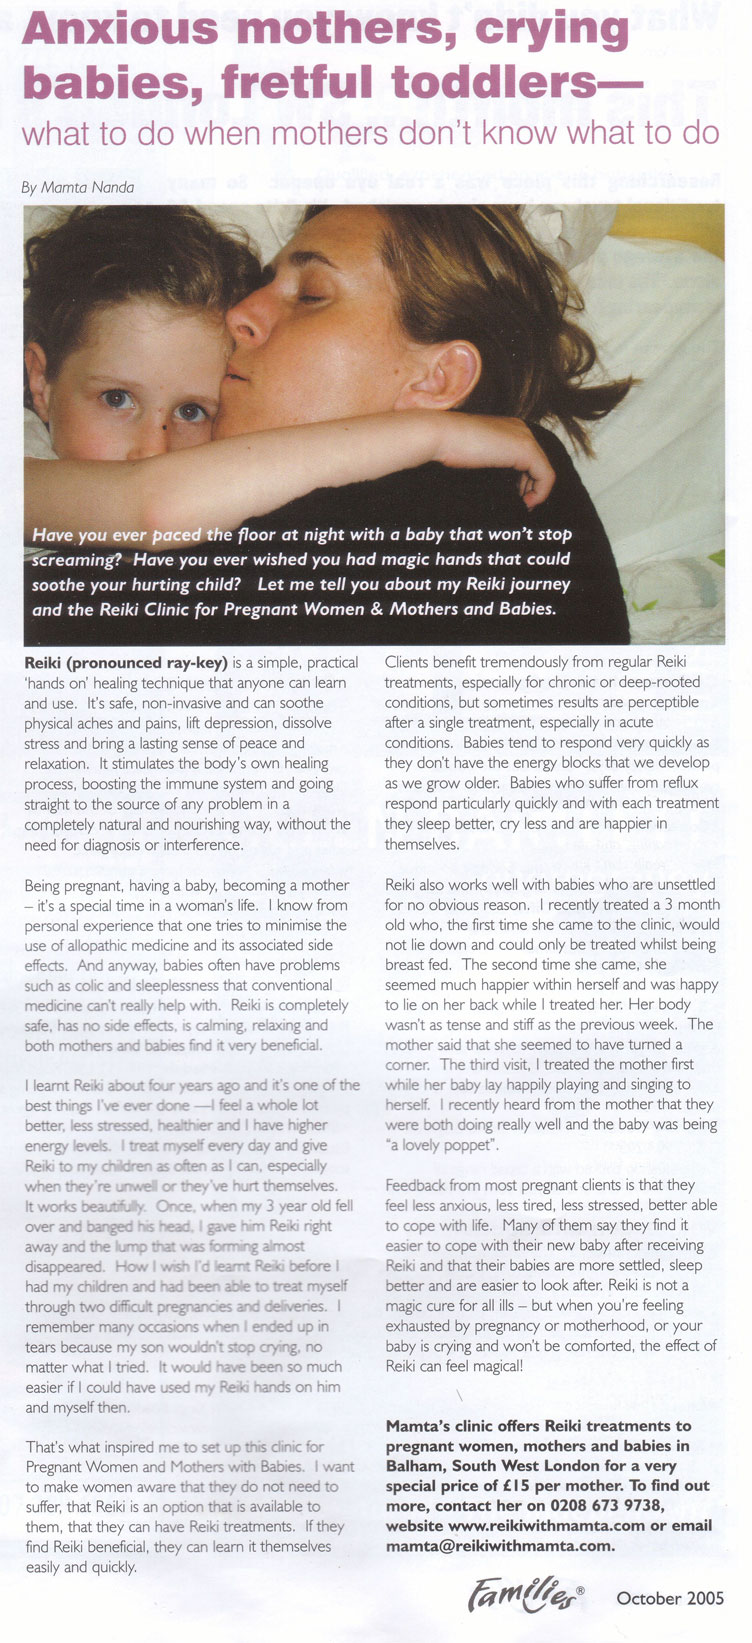 Family SouthWest article Reiki for Mothers, babies, children October 2005